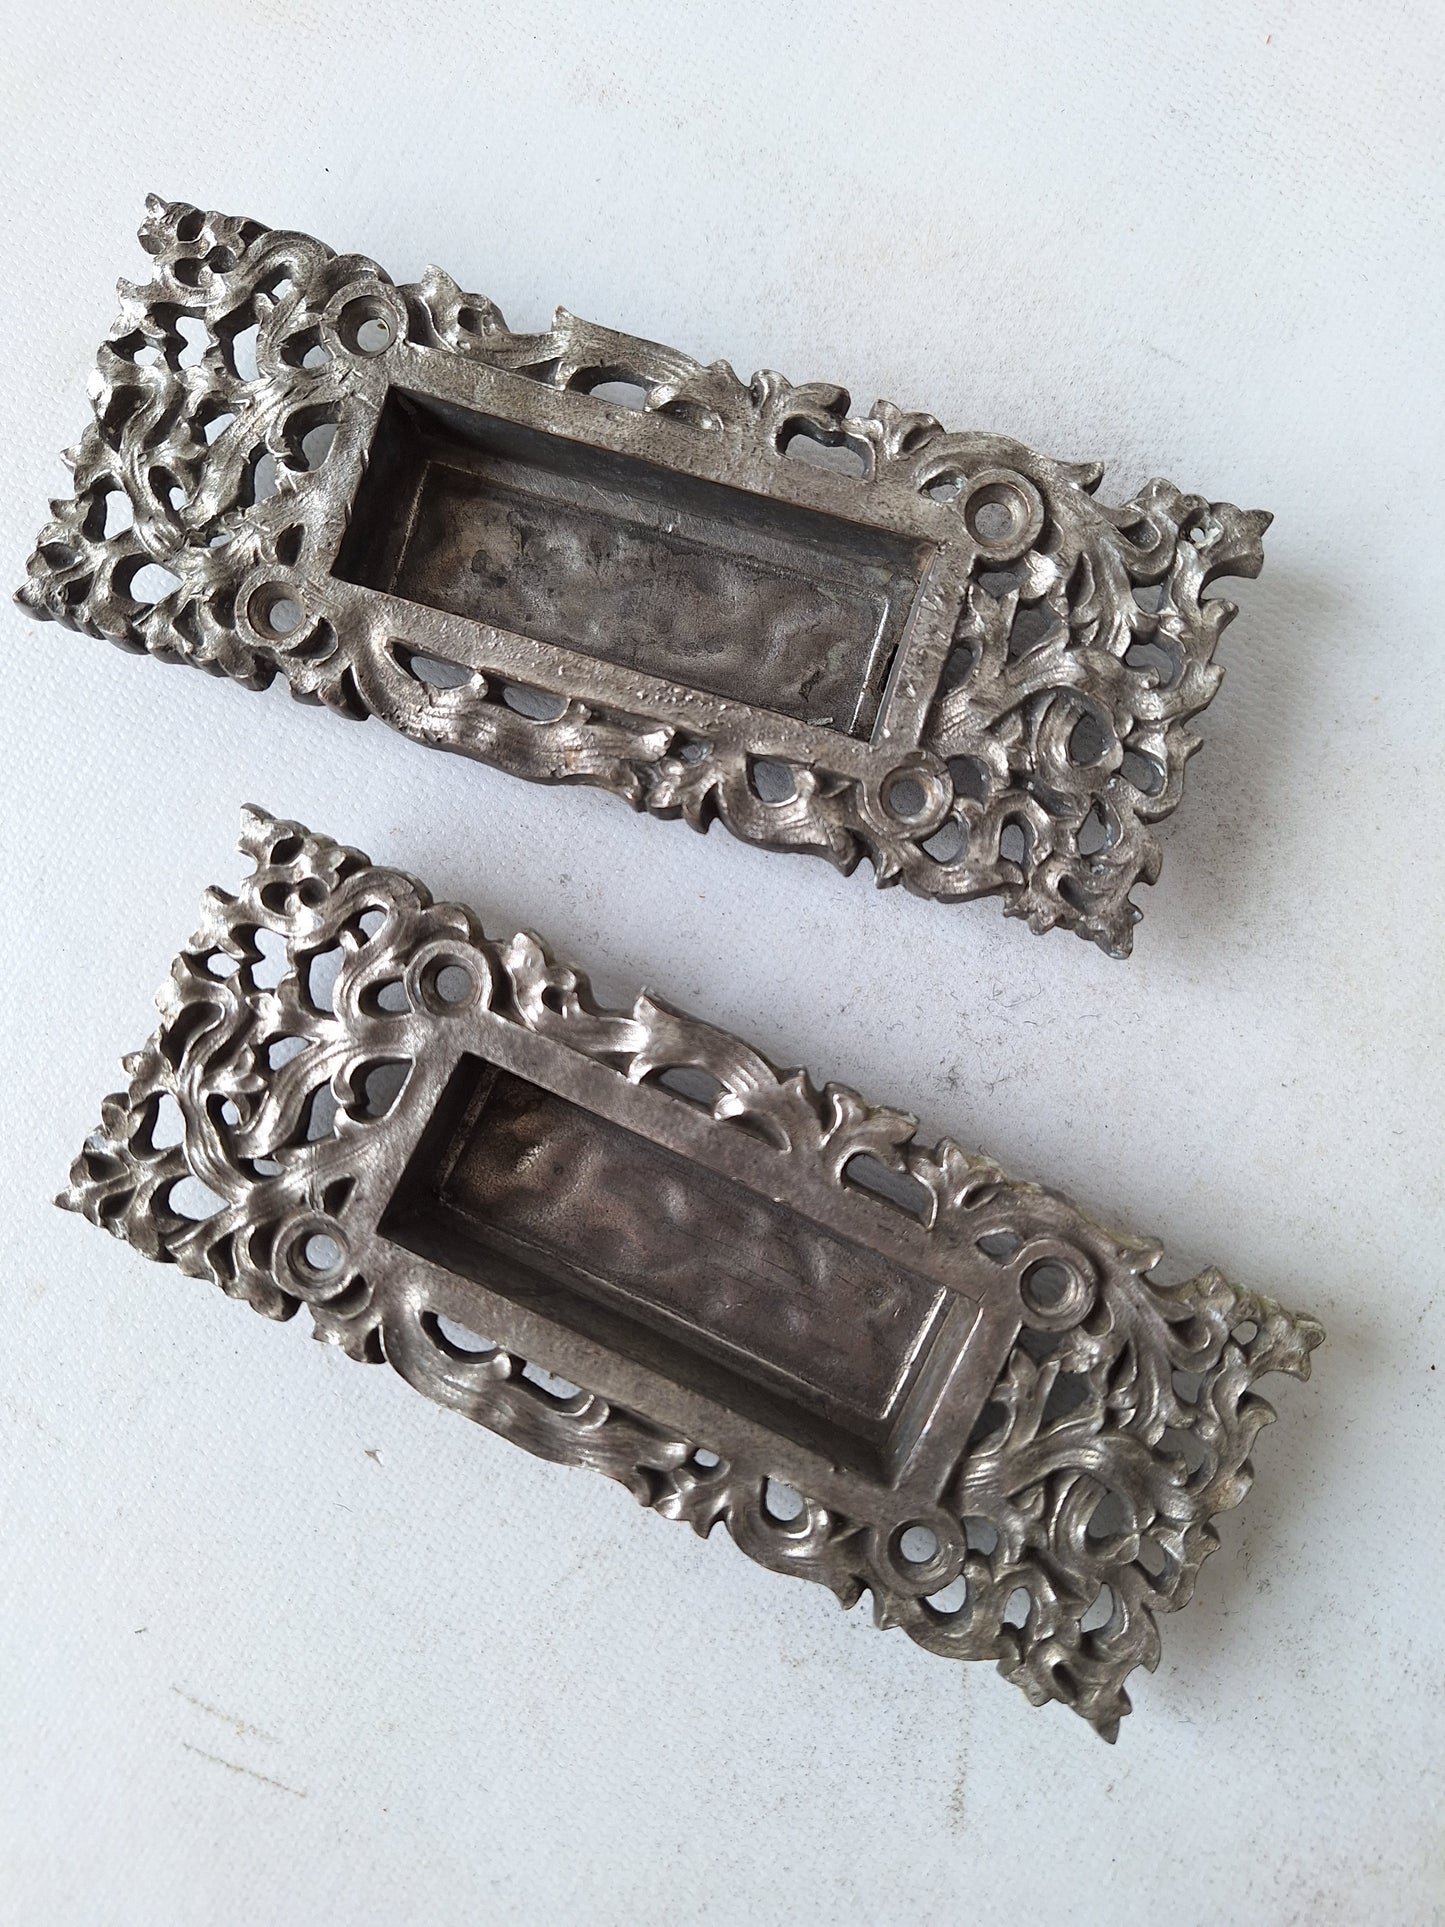 Pair of Kelp Pattern Window Sash Lifts, Antique Wood Window Handles by Yale and Towne 041804